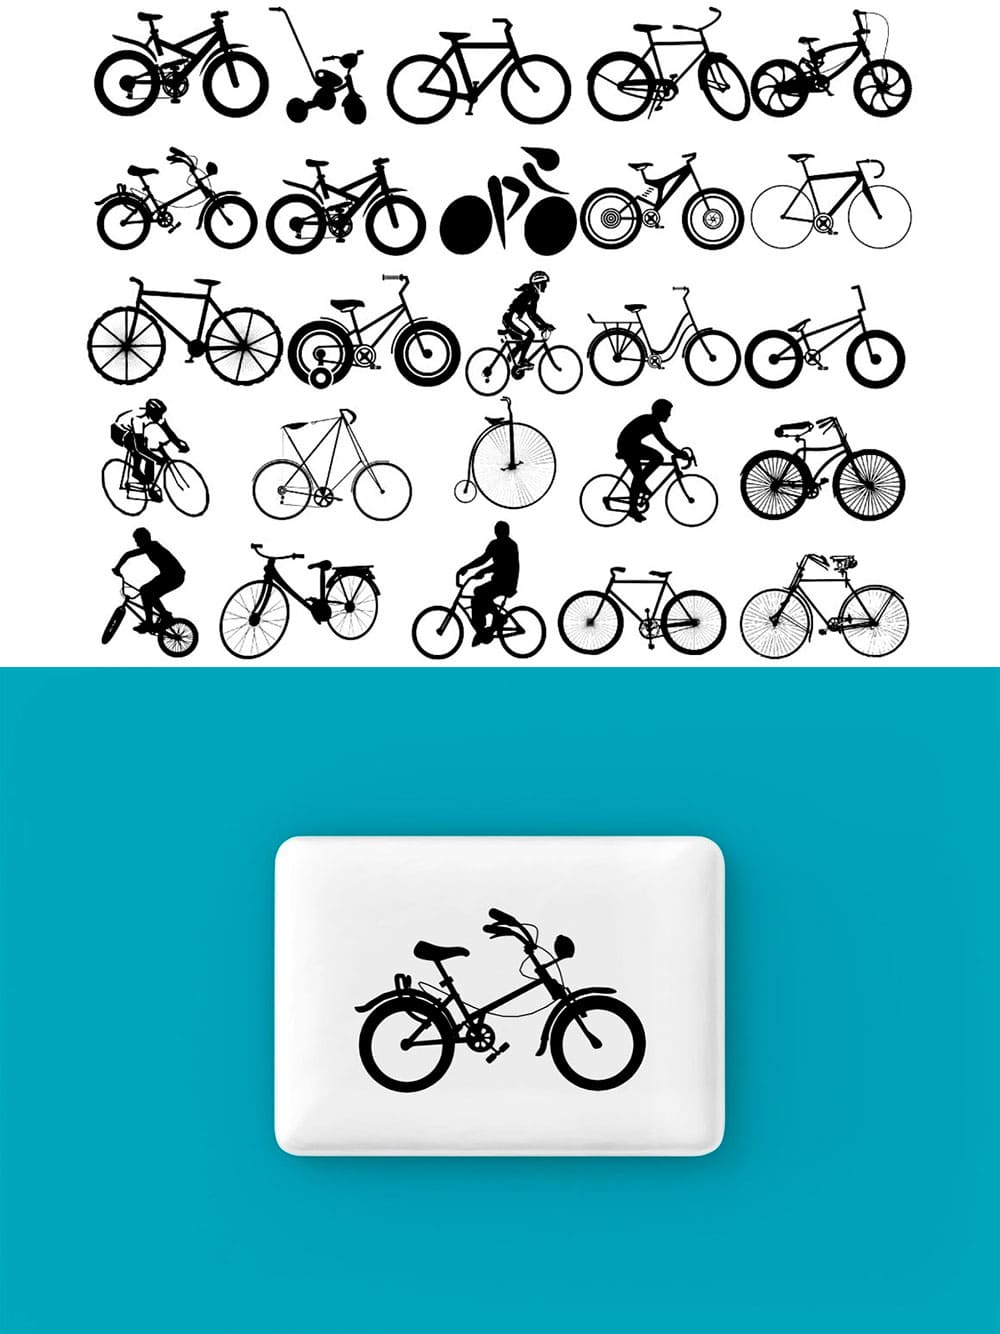 Bike silhouette, picture for pinterest.